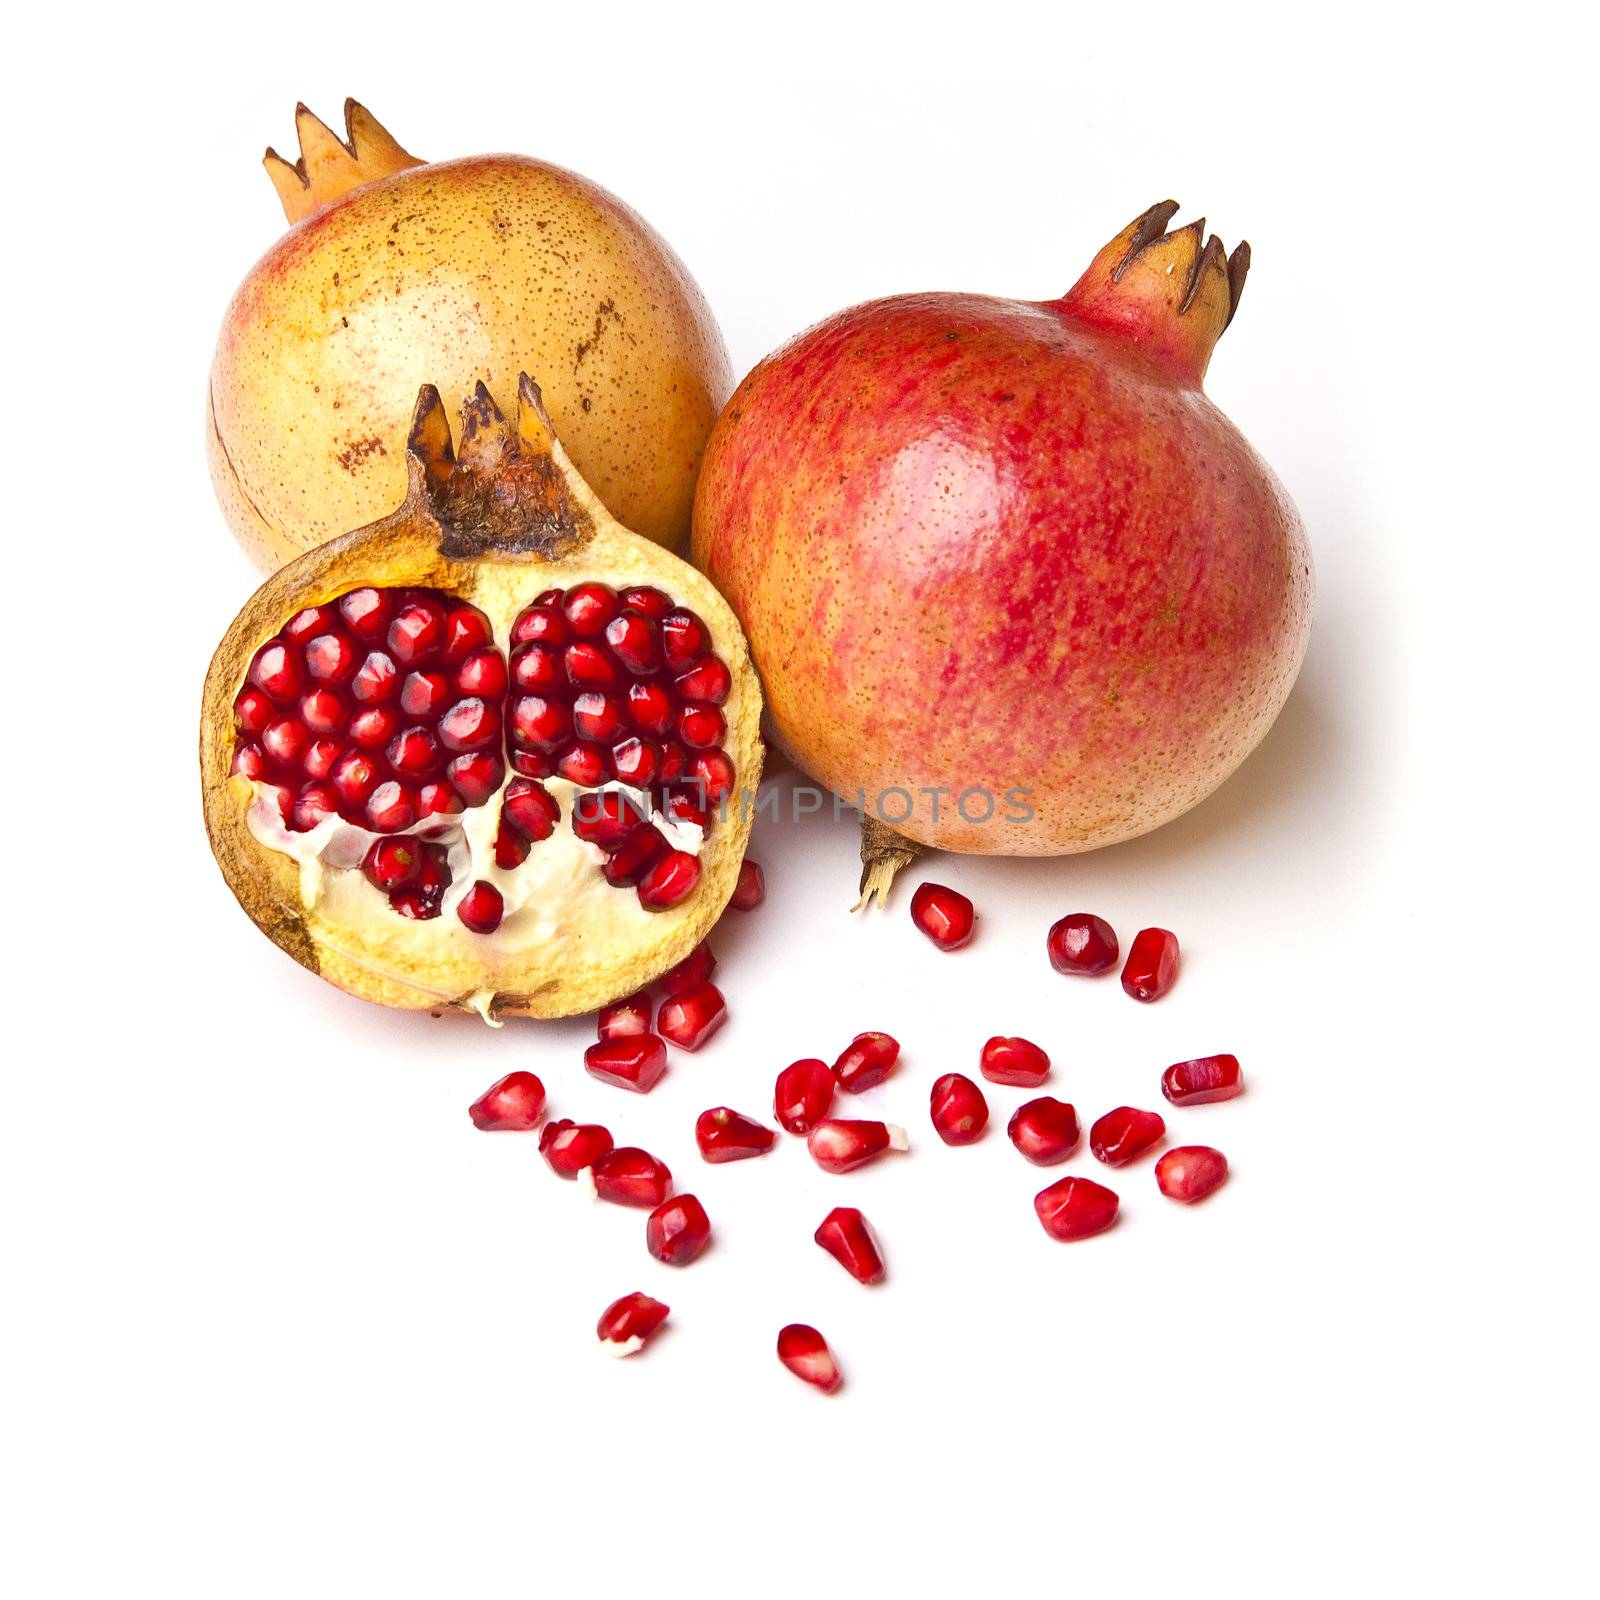 Group of Pomegranate with seeds by adamr